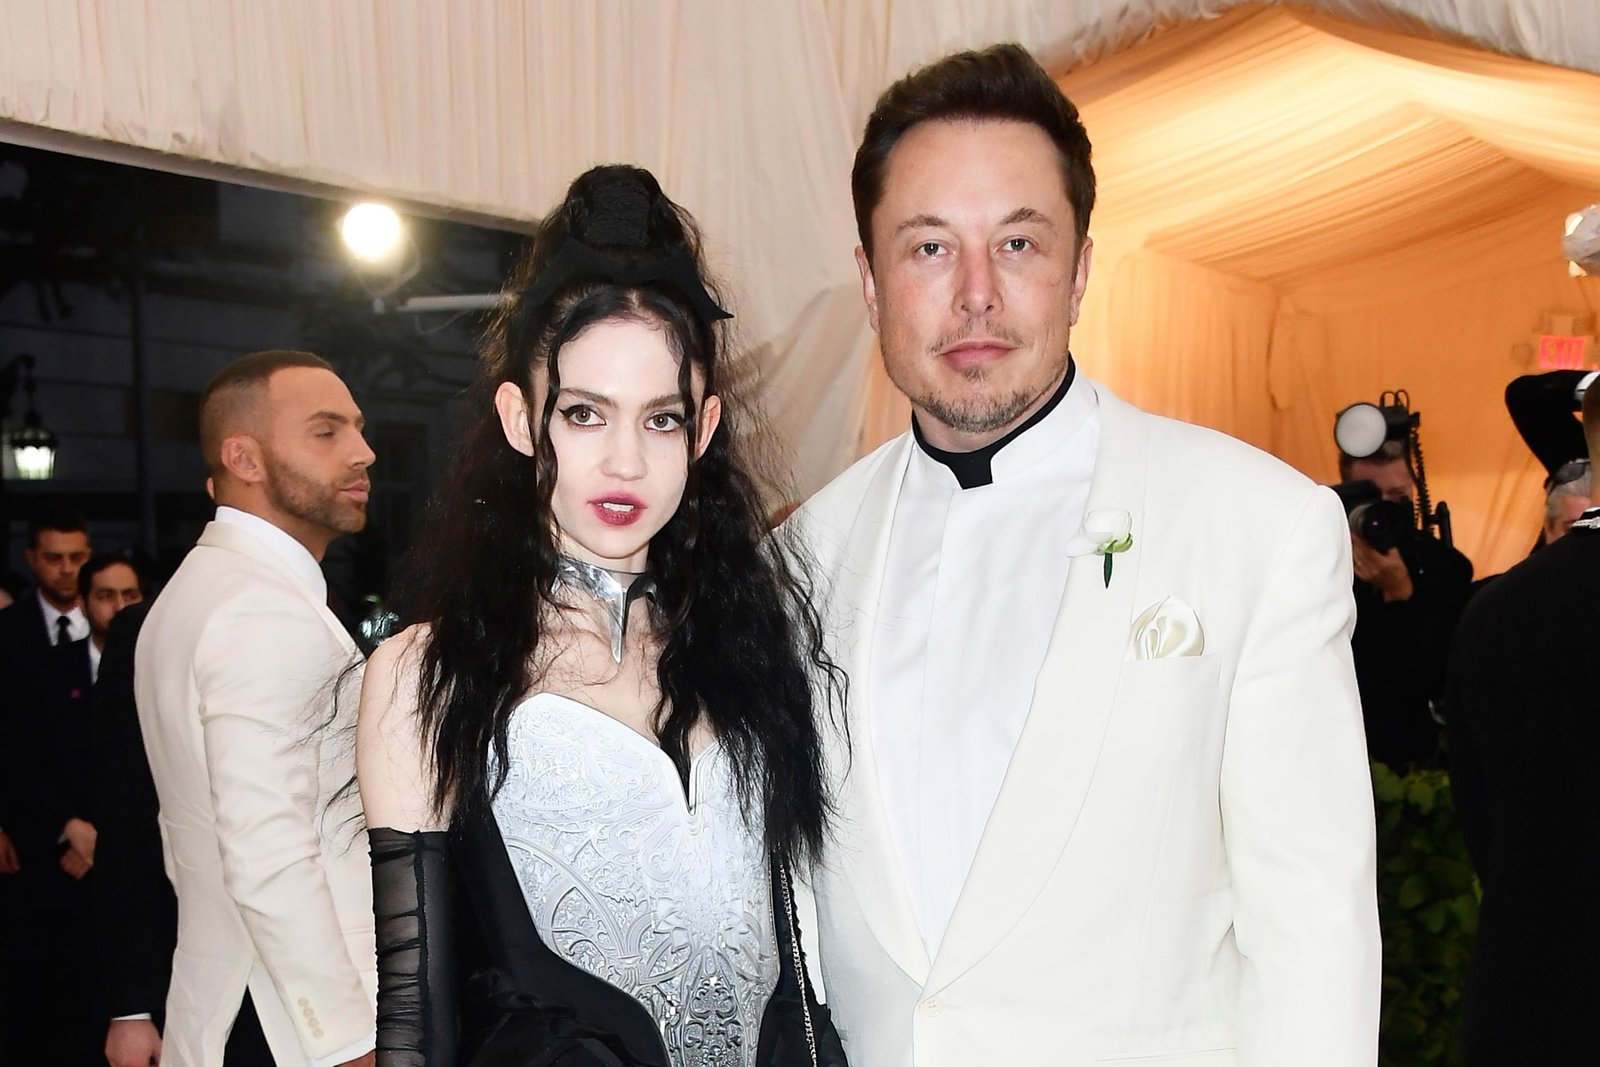 Elon Musk says he and partner Grimes are semi-separated